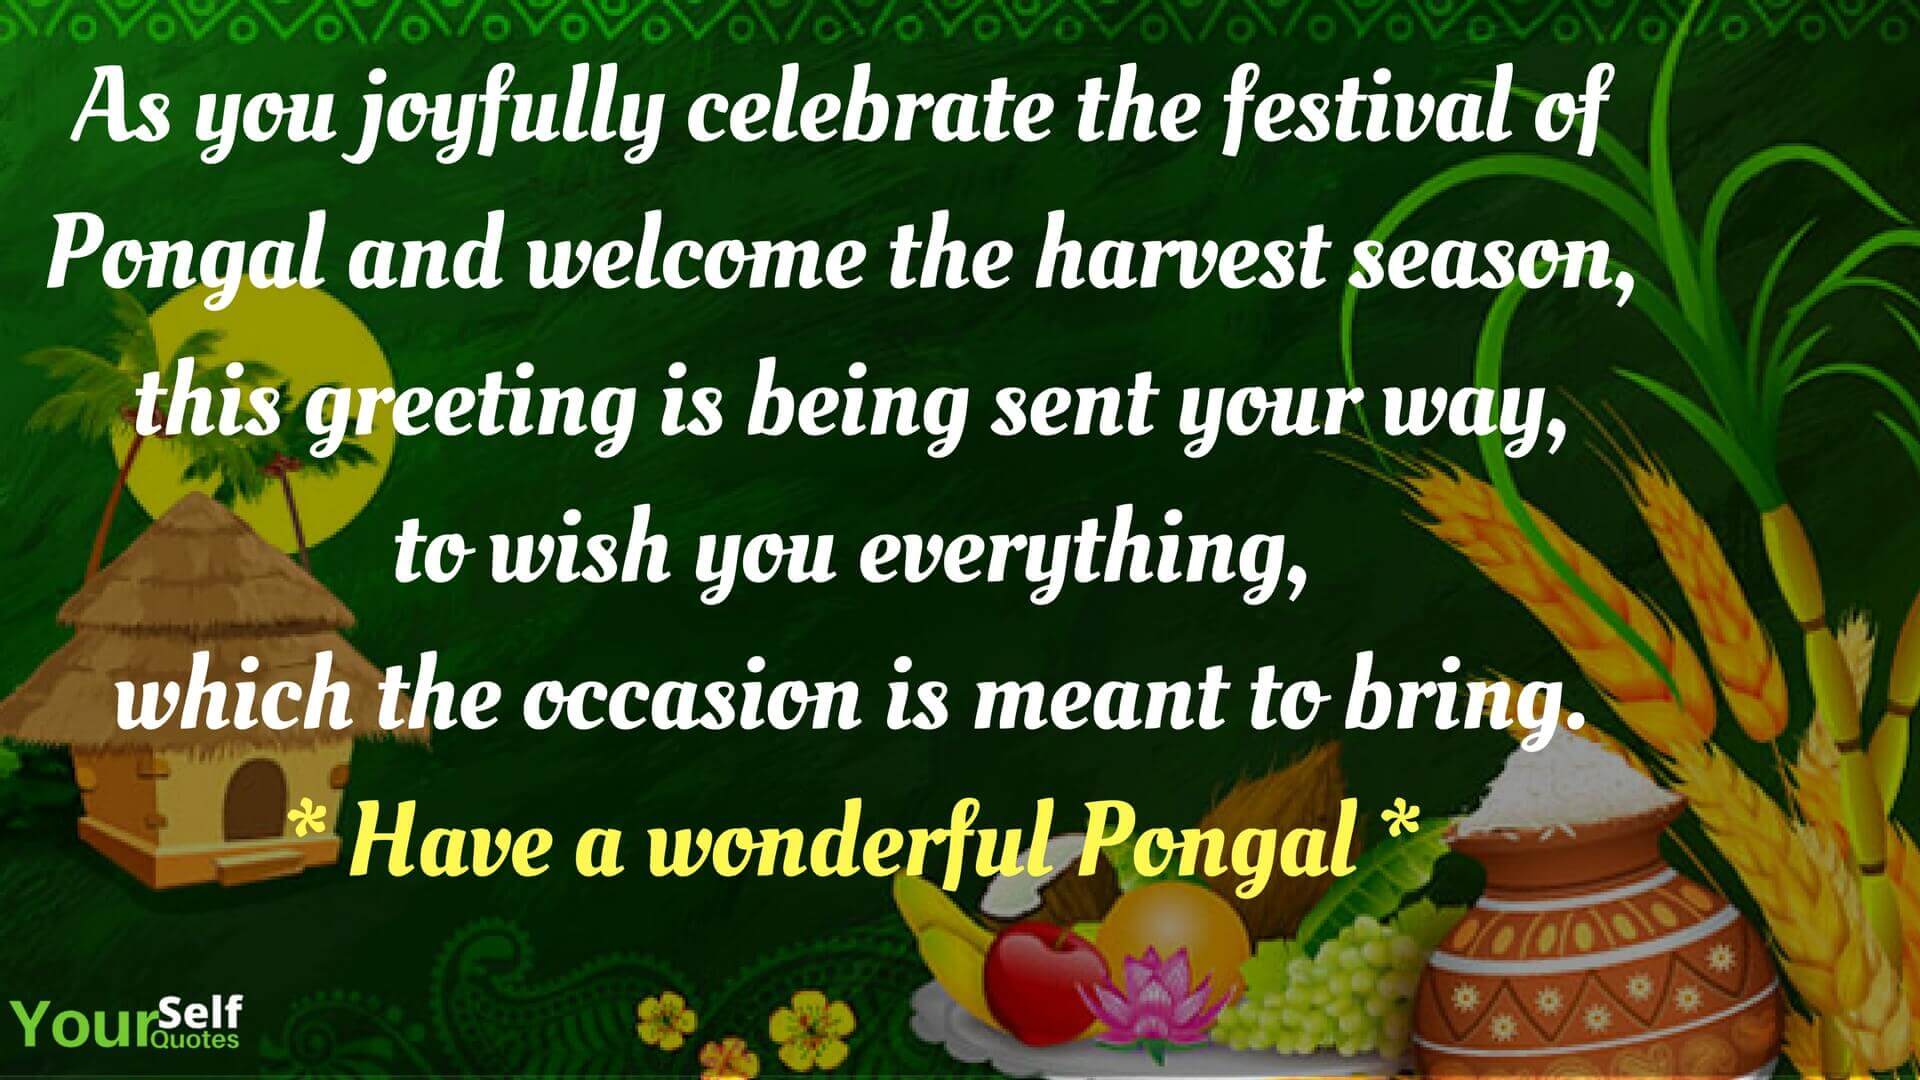 Happy Pongal Festival Wishes Photo